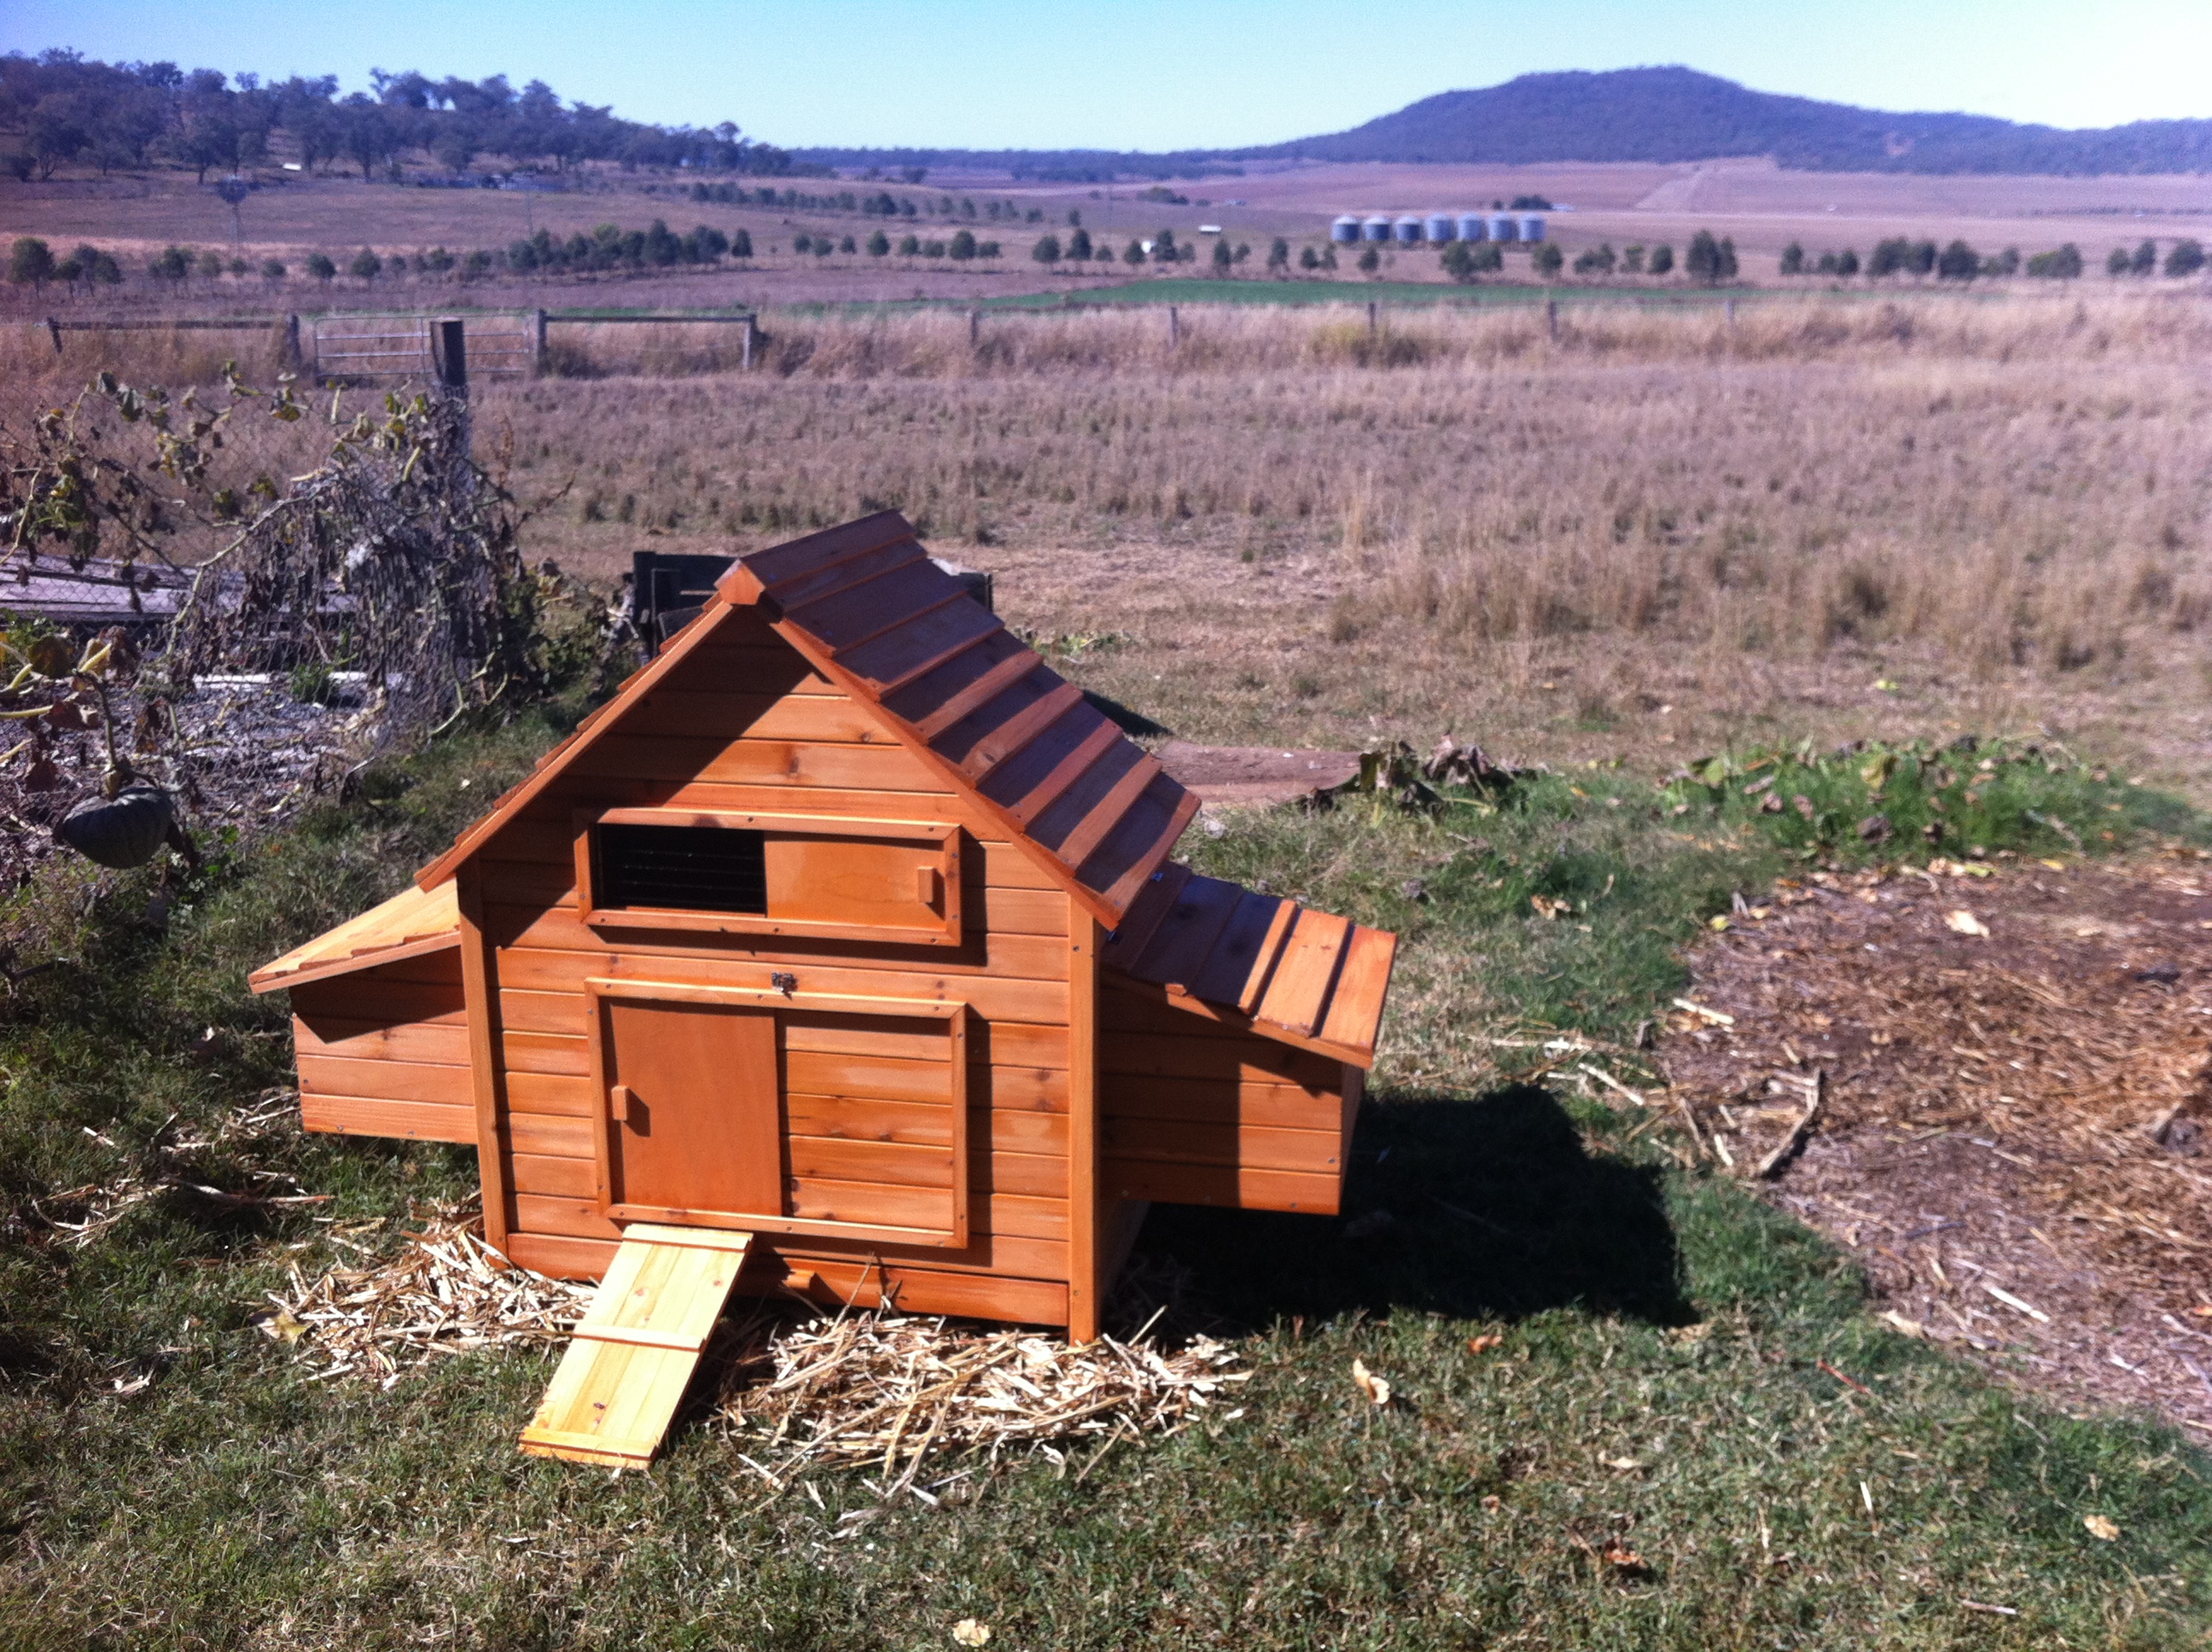 The coop next to the vege patch.